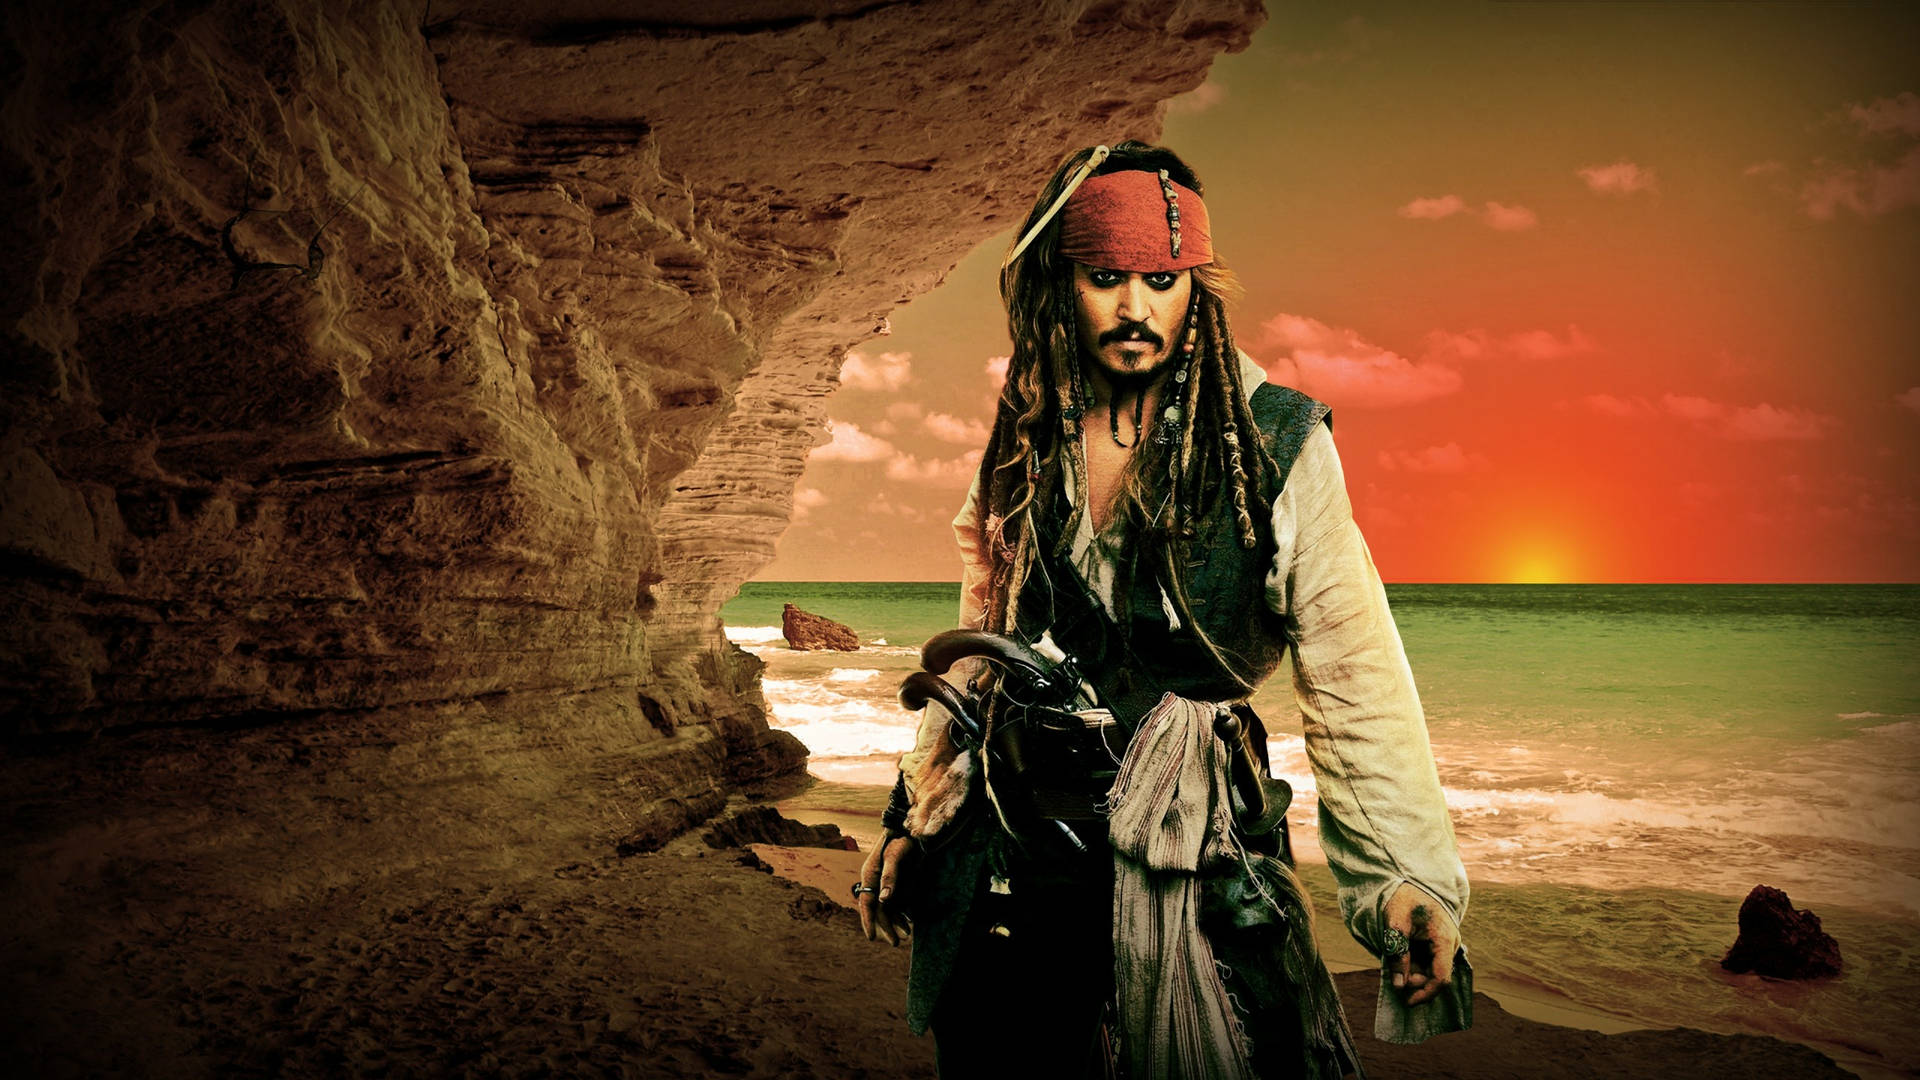 Pirates Of The Caribbean Angry Jack Sparrow Background